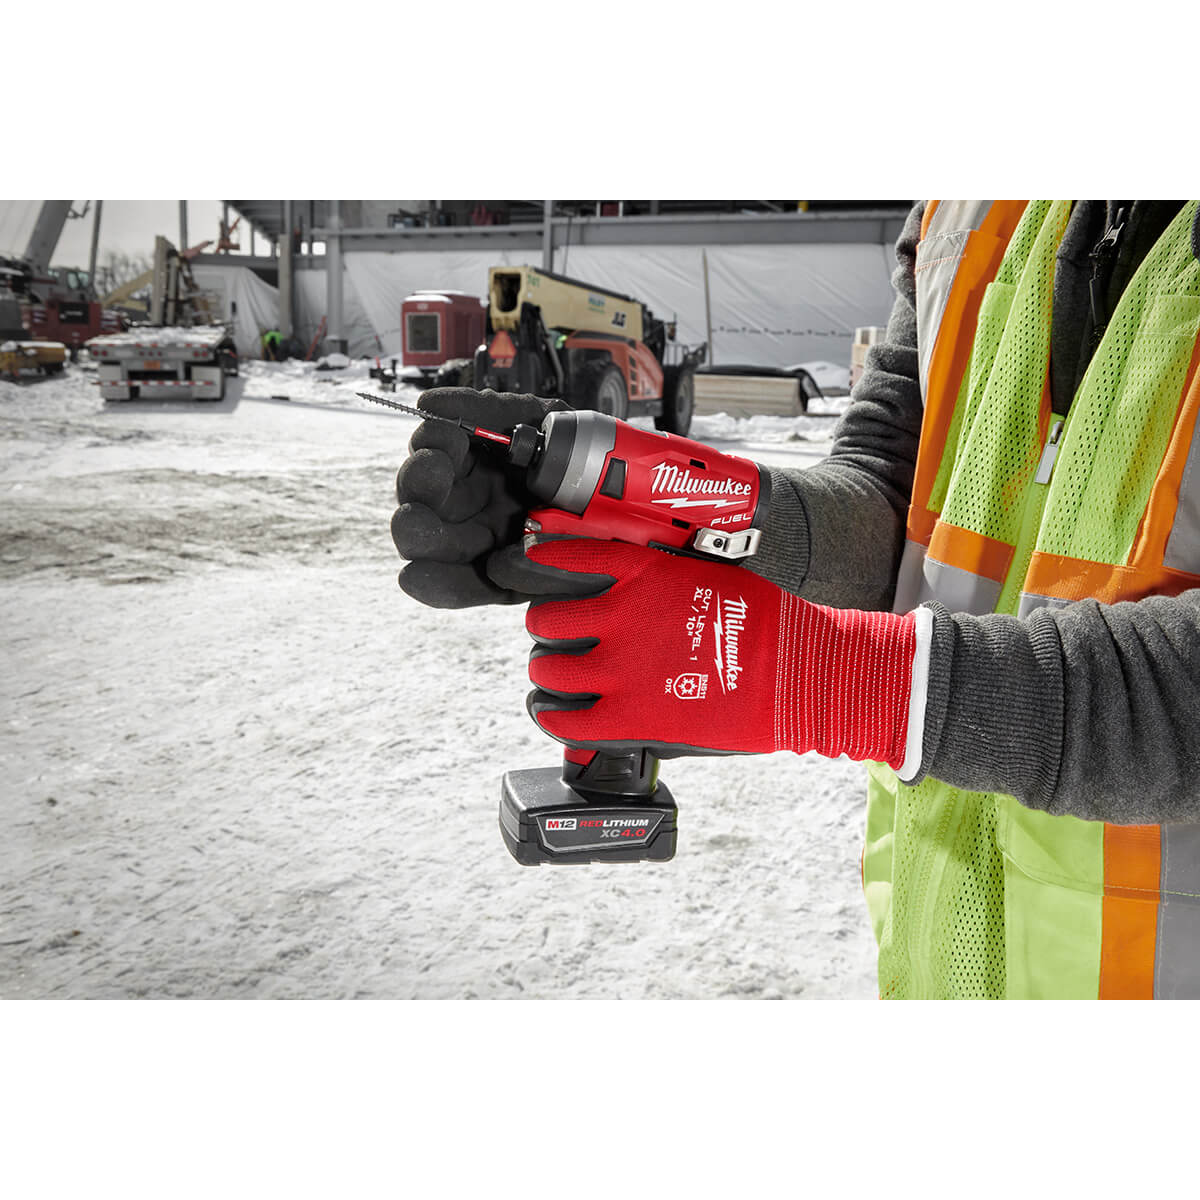 Milwaukee Cut Level 1 Insulated Gloves - XL - wise-line-tools